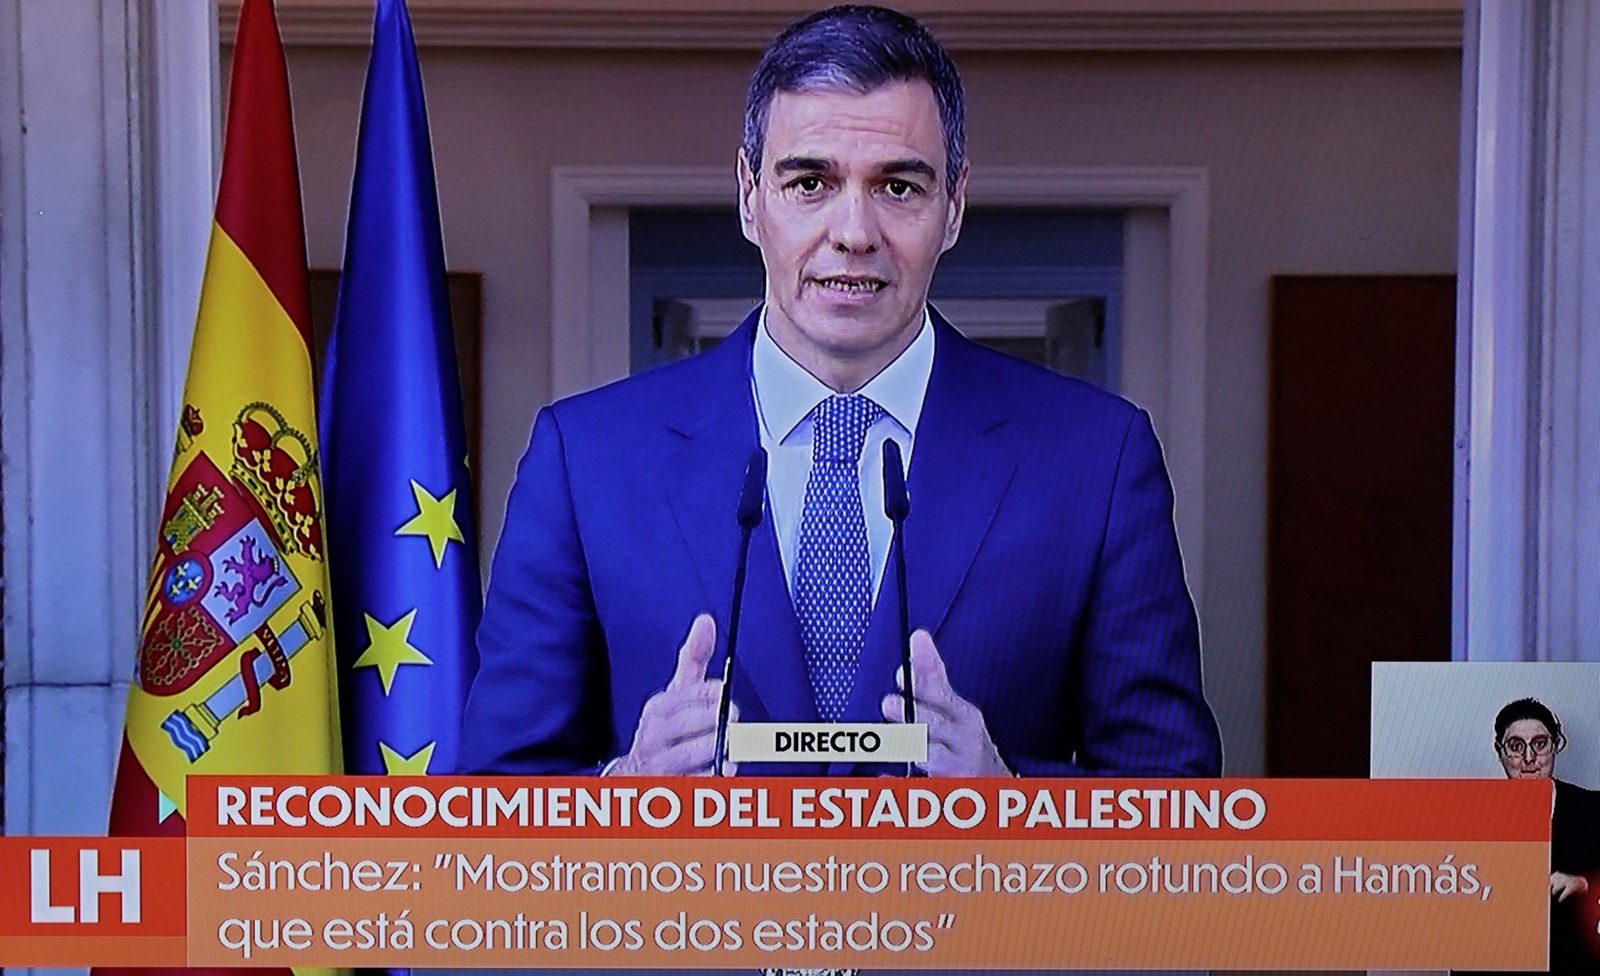 A picture of a TV screen taken on May 28, 2024 shows Spain's Prime Minister Pedro Sanchez delivering a speech over the recognition of Palestinian statehood by Spain, at La Moncloa Palace in Madrid. Recognising Palestinian statehood is 'essential for reaching peace' said Spain's Prime Minister Pedro Sanchez on May 28, 2024. Spain, Ireland and Norway will formally recognise a Palestinian state Tuesday in a decision slammed by Israel as a "reward" for Hamas more than seven months into the devastating Gaza war.,Image: 877029930, License: Rights-managed, Restrictions: , Model Release: no, Credit line: Thomas COEX / AFP / Profimedia